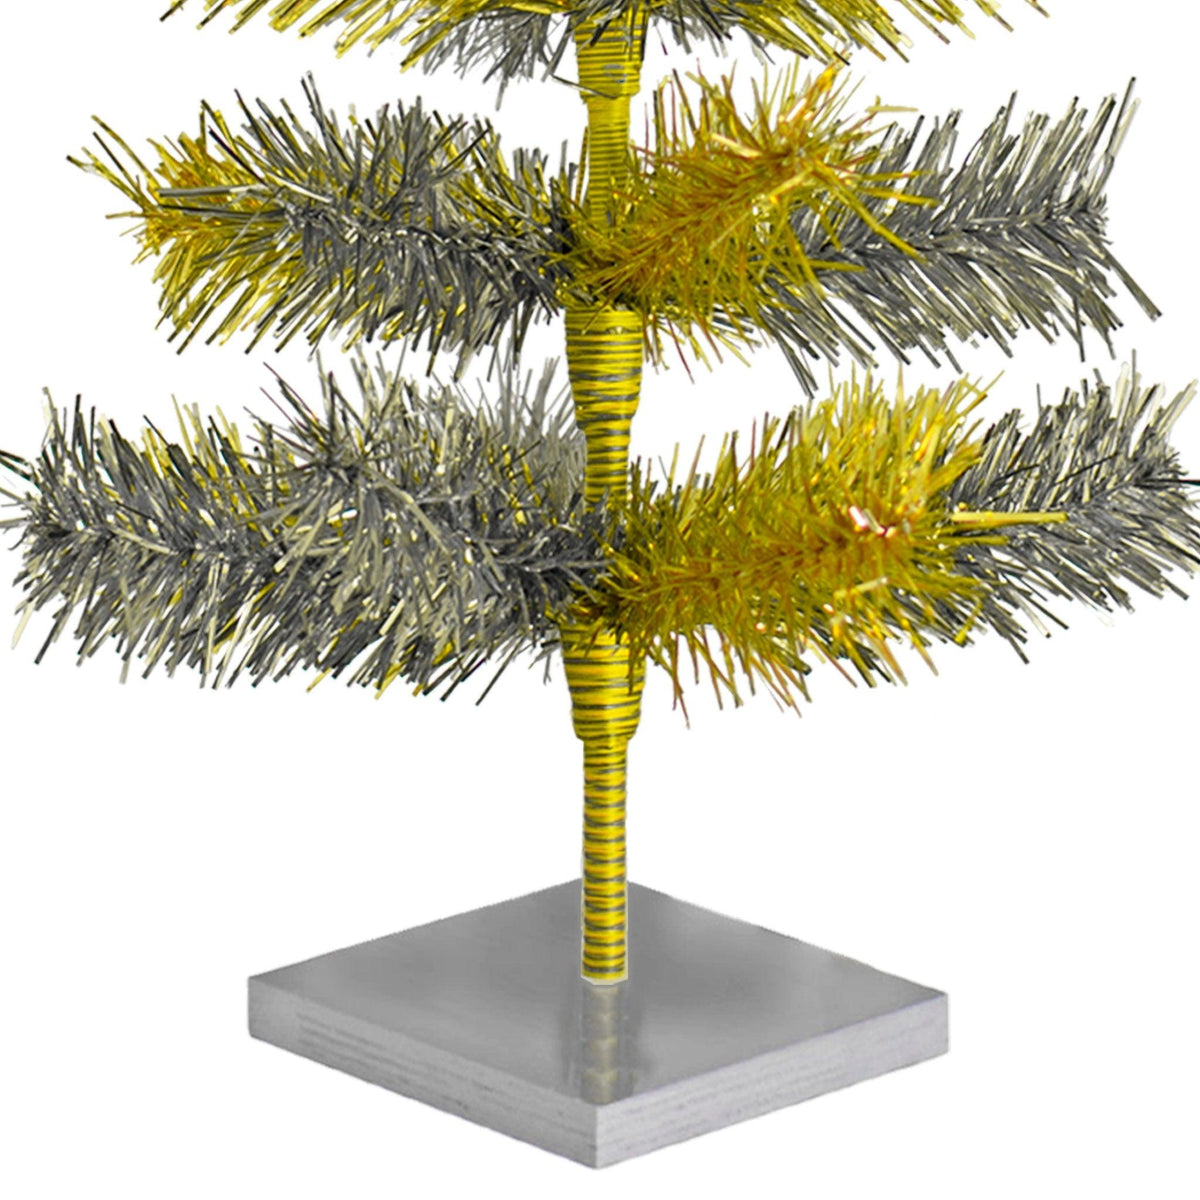 Gold and Silver Mixed Tinsel Brush Christmas Trees come with a silver wooden stand